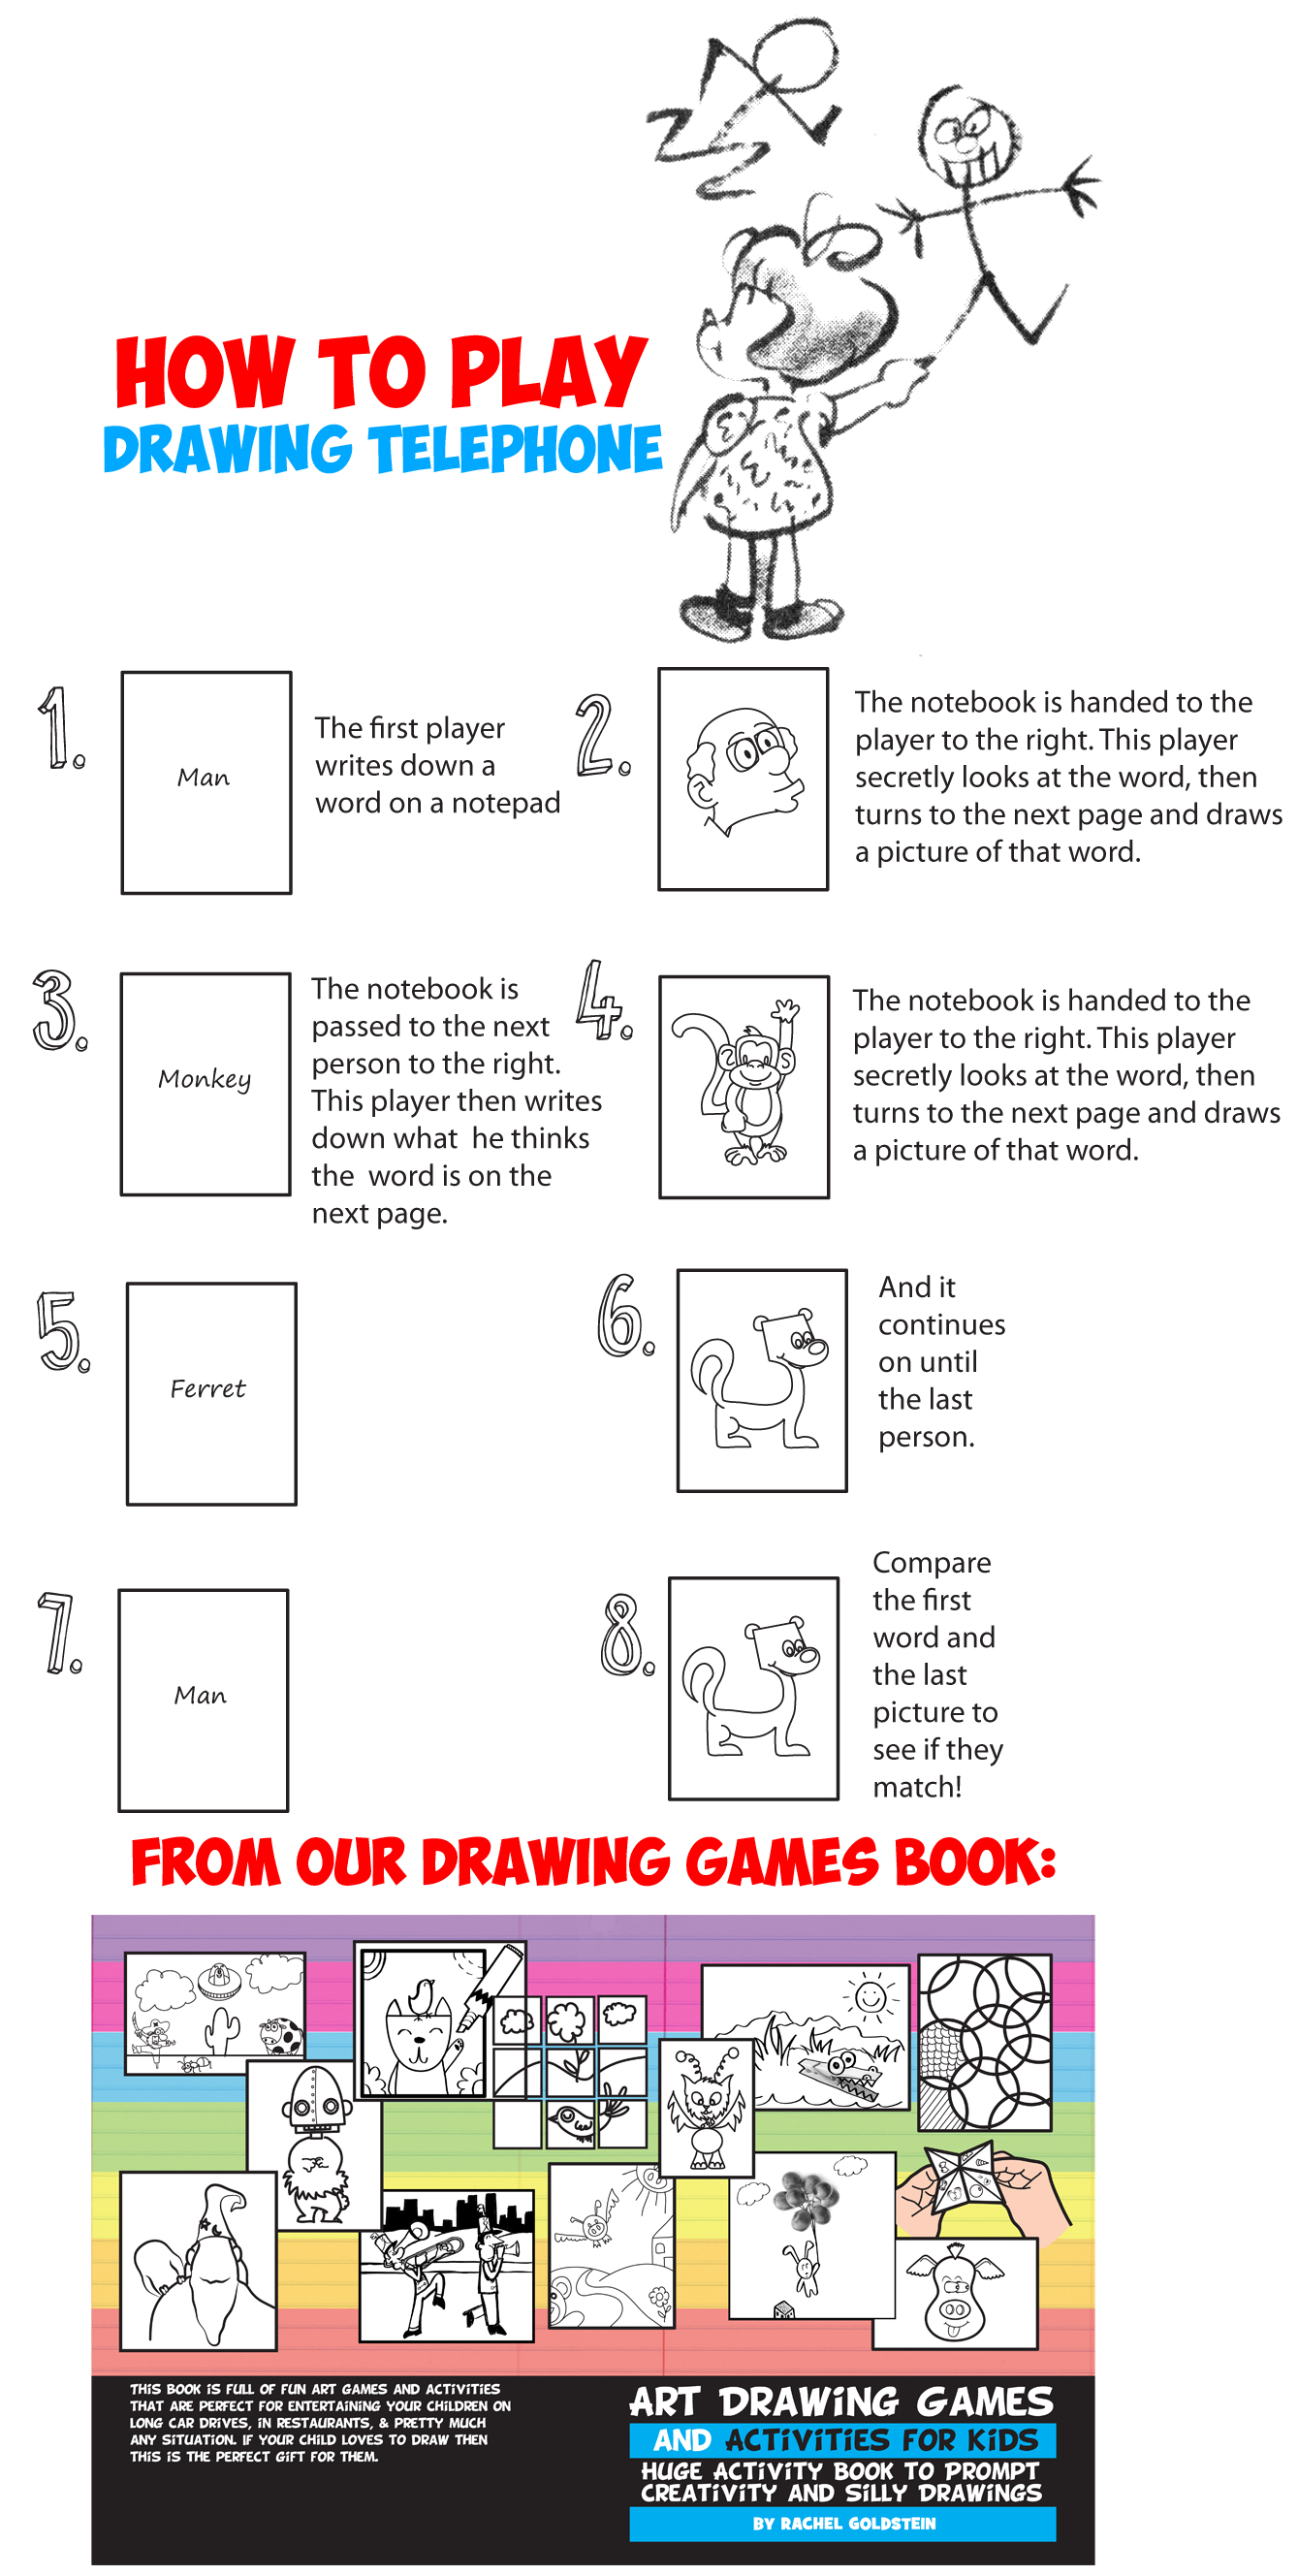 See if You Can Draw Game Drawing Lessons Kids Elementary School Art